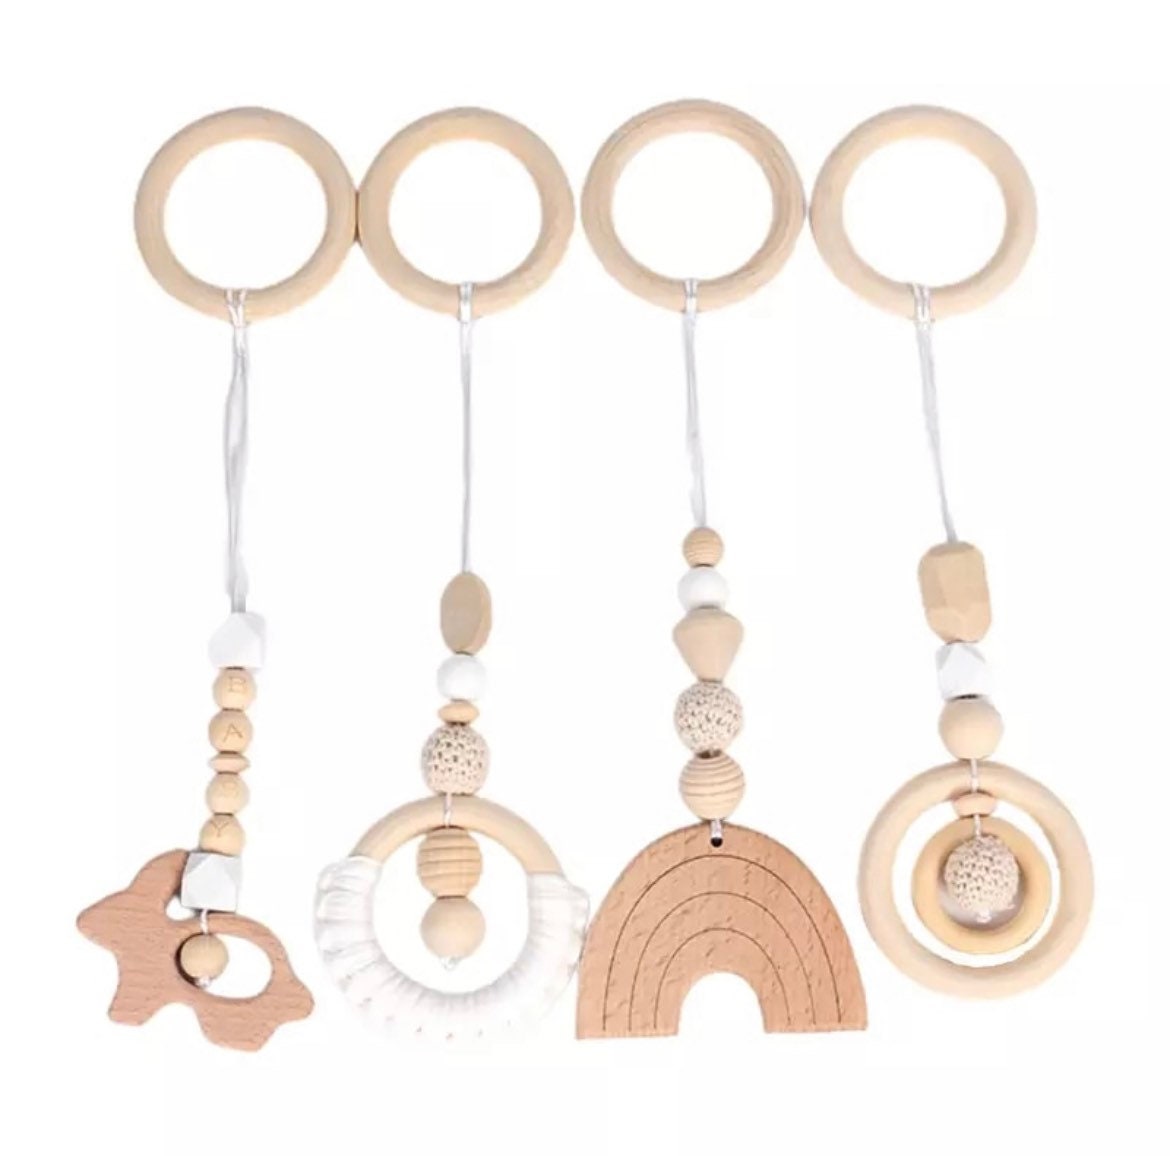 Wood Baby Montessori Gym & Toys-Gorgeous Wood Baby Play Gym Toys Set of 4These toys assist your babies fitness -perfect for lively babies and can exercise the child's physical coordination ability.-Bijou Bubs